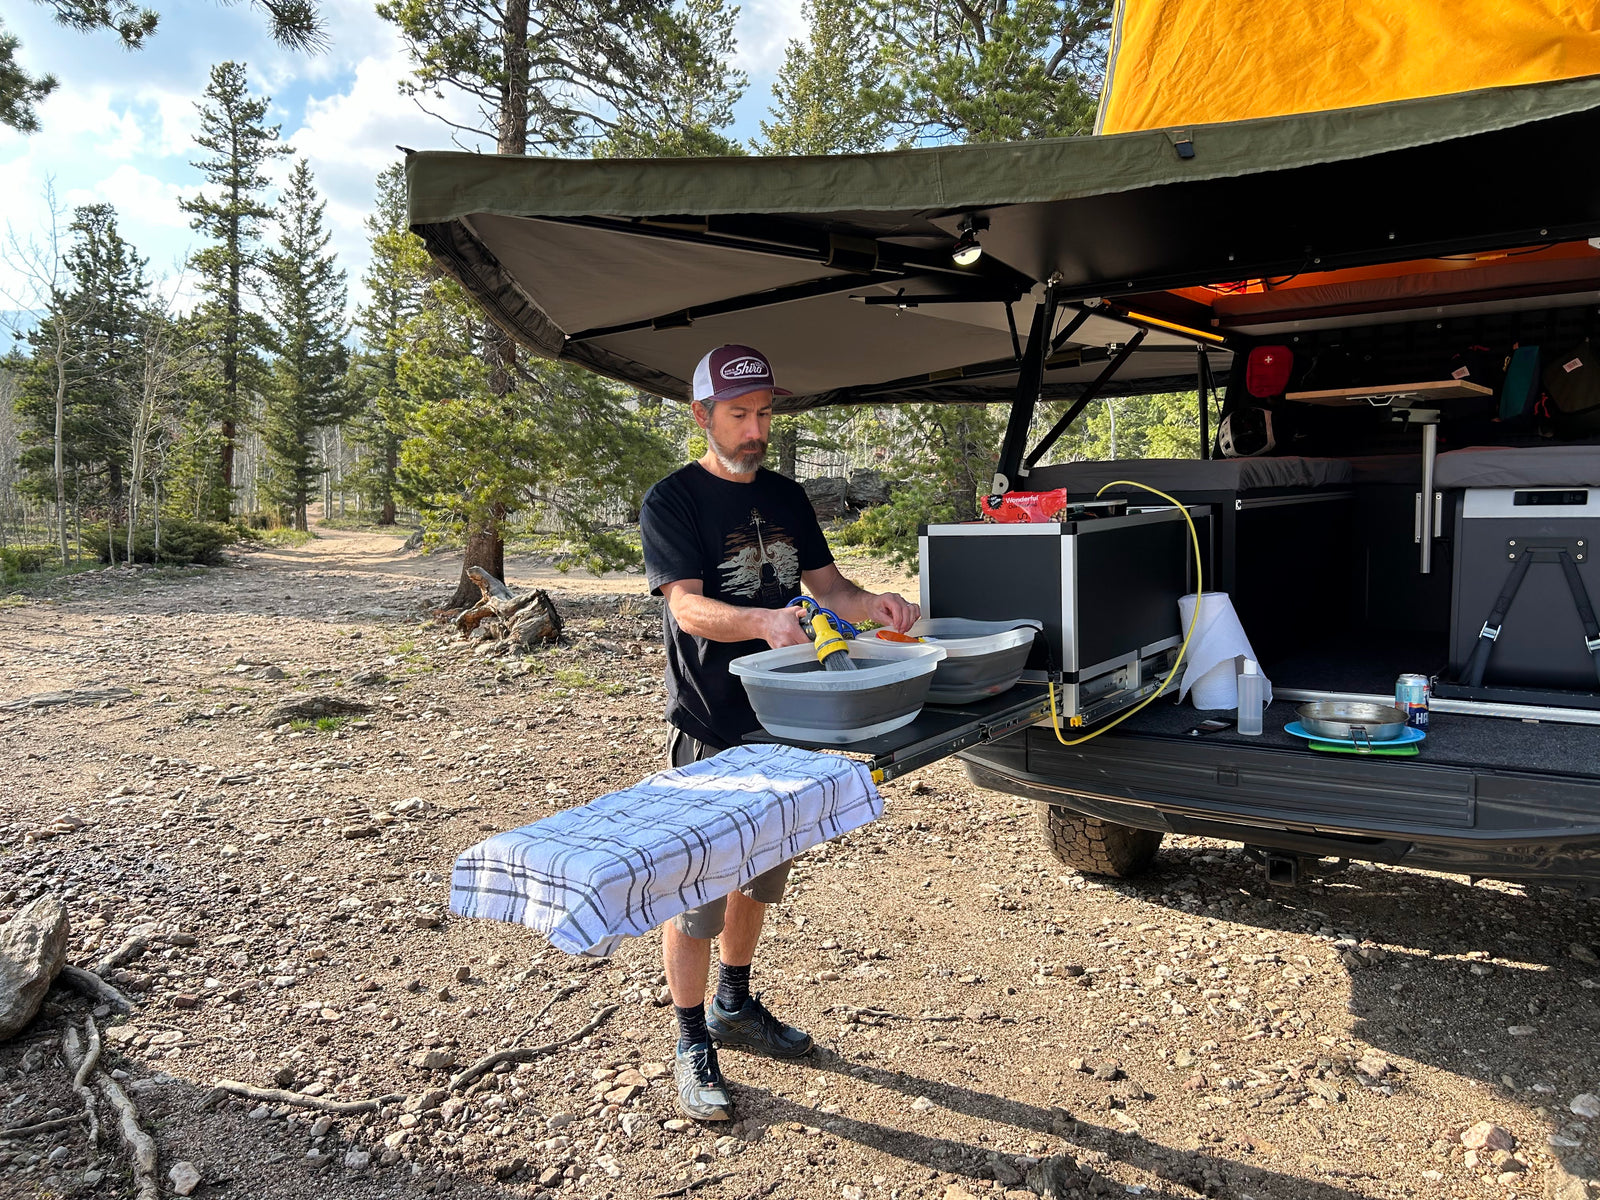 Go Fast Camper (GFC) build - Slide out camp kitchen washing dishes with Geyser System